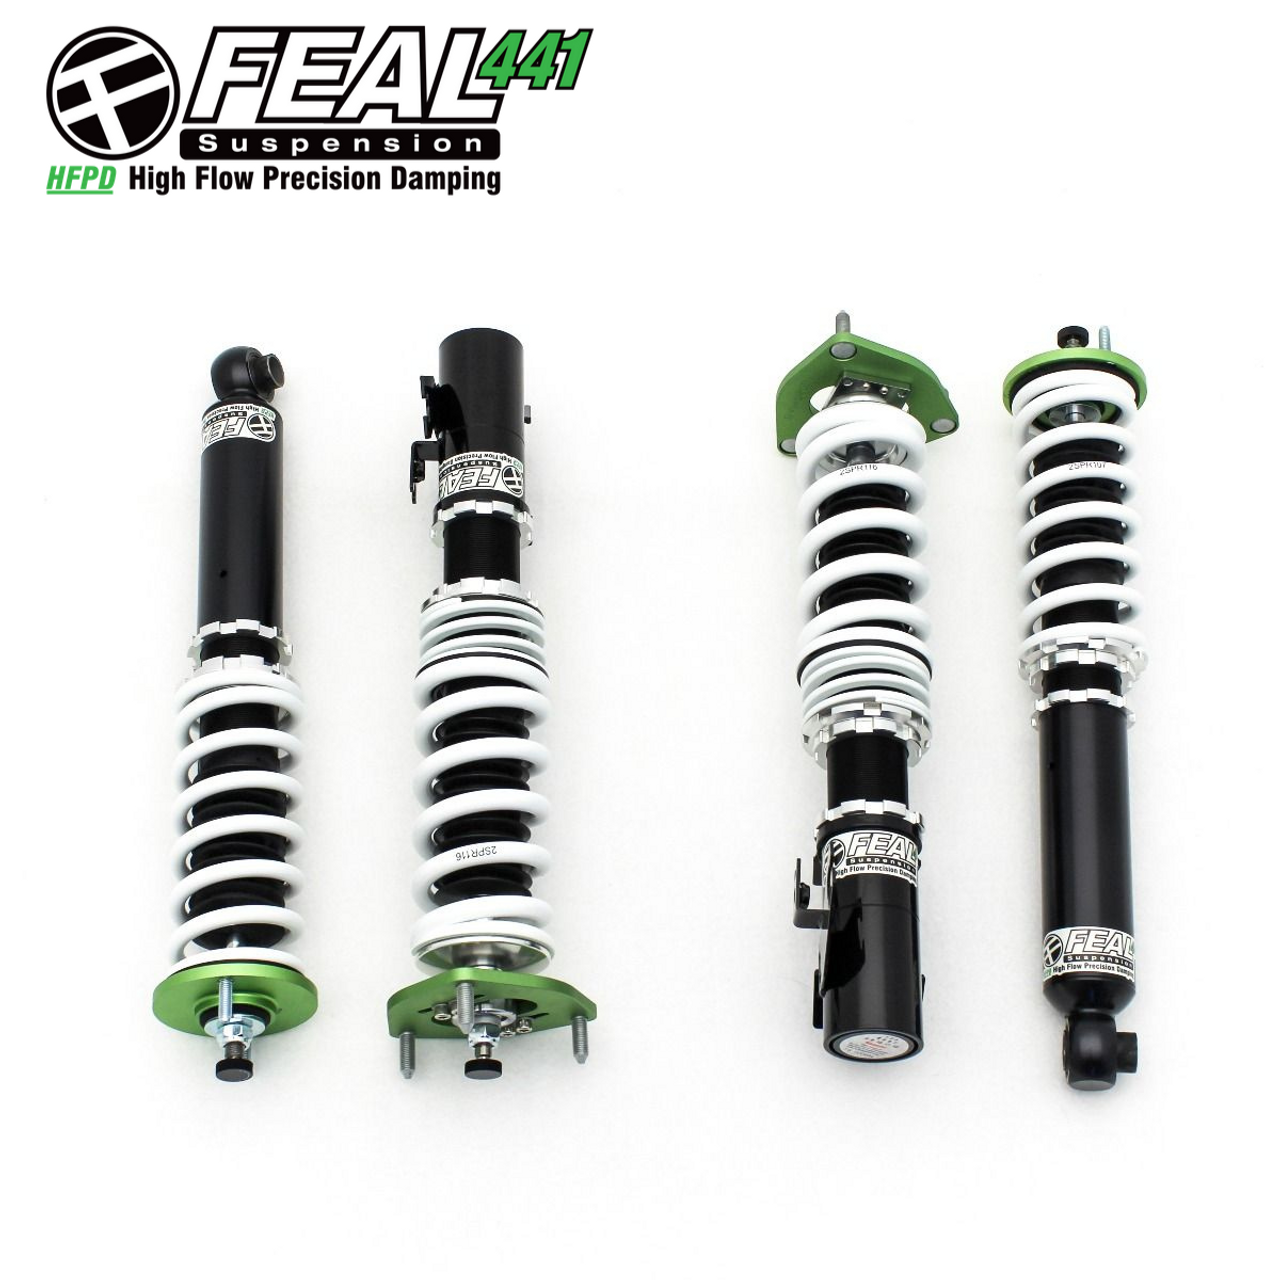 Feal Suspension 441 Coilover Kit - Nissan S14 / Nissan S15